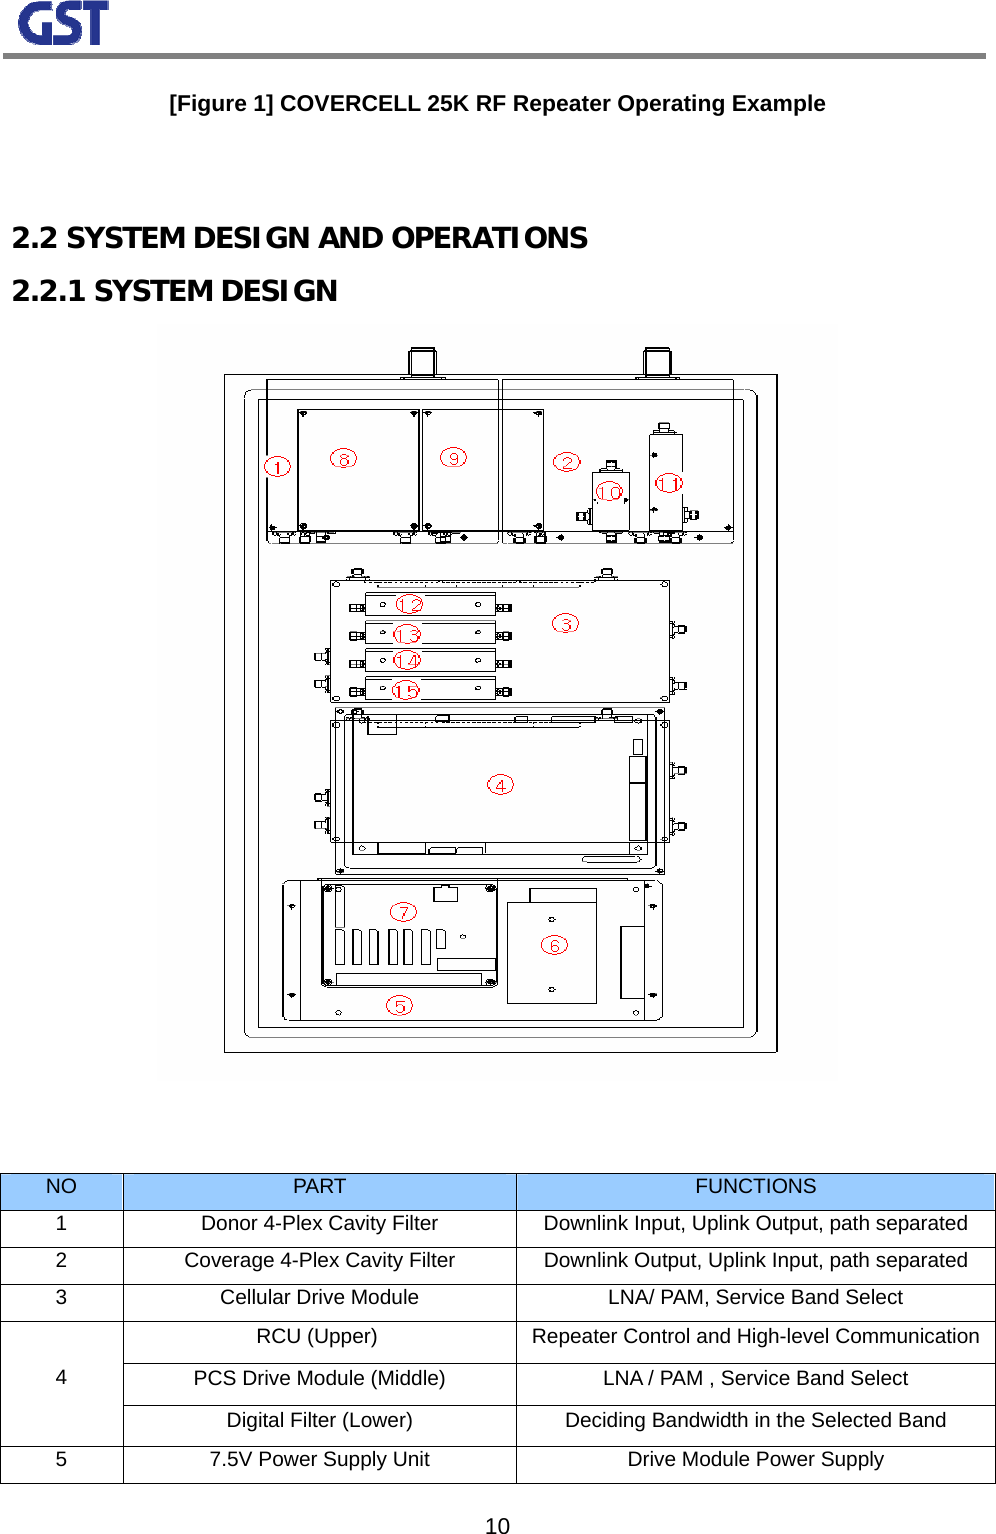                                                                                                                  10[Figure 1] COVERCELL 25K RF Repeater Operating Example   2.2 SYSTEM DESIGN AND OPERATIONS 2.2.1 SYSTEM DESIGN    NO  PART  FUNCTIONS 1  Donor 4-Plex Cavity Filter  Downlink Input, Uplink Output, path separated 2  Coverage 4-Plex Cavity Filter  Downlink Output, Uplink Input, path separated 3  Cellular Drive Module  LNA/ PAM, Service Band Select RCU (Upper)   Repeater Control and High-level CommunicationPCS Drive Module (Middle)  LNA / PAM , Service Band Select 4 Digital Filter (Lower)  Deciding Bandwidth in the Selected Band 5  7.5V Power Supply Unit  Drive Module Power Supply 